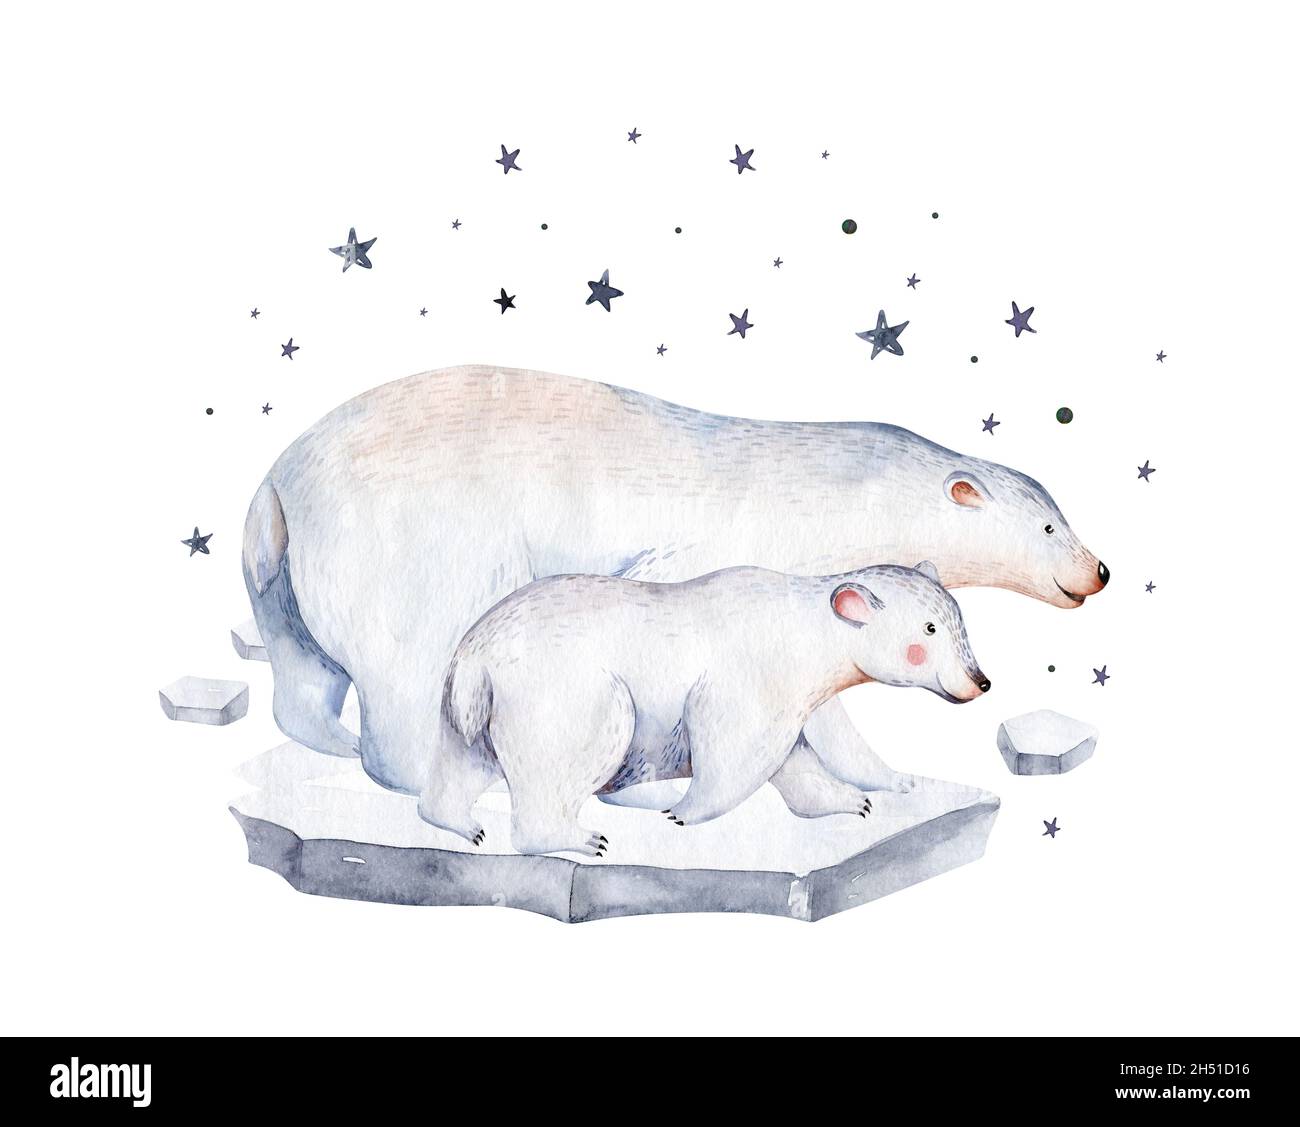 Watercolor animals illustrations. Cute wild animal. Polar Bears silhouette isolated on a white background. Sketch art. Save the Arctic. Stock Photo